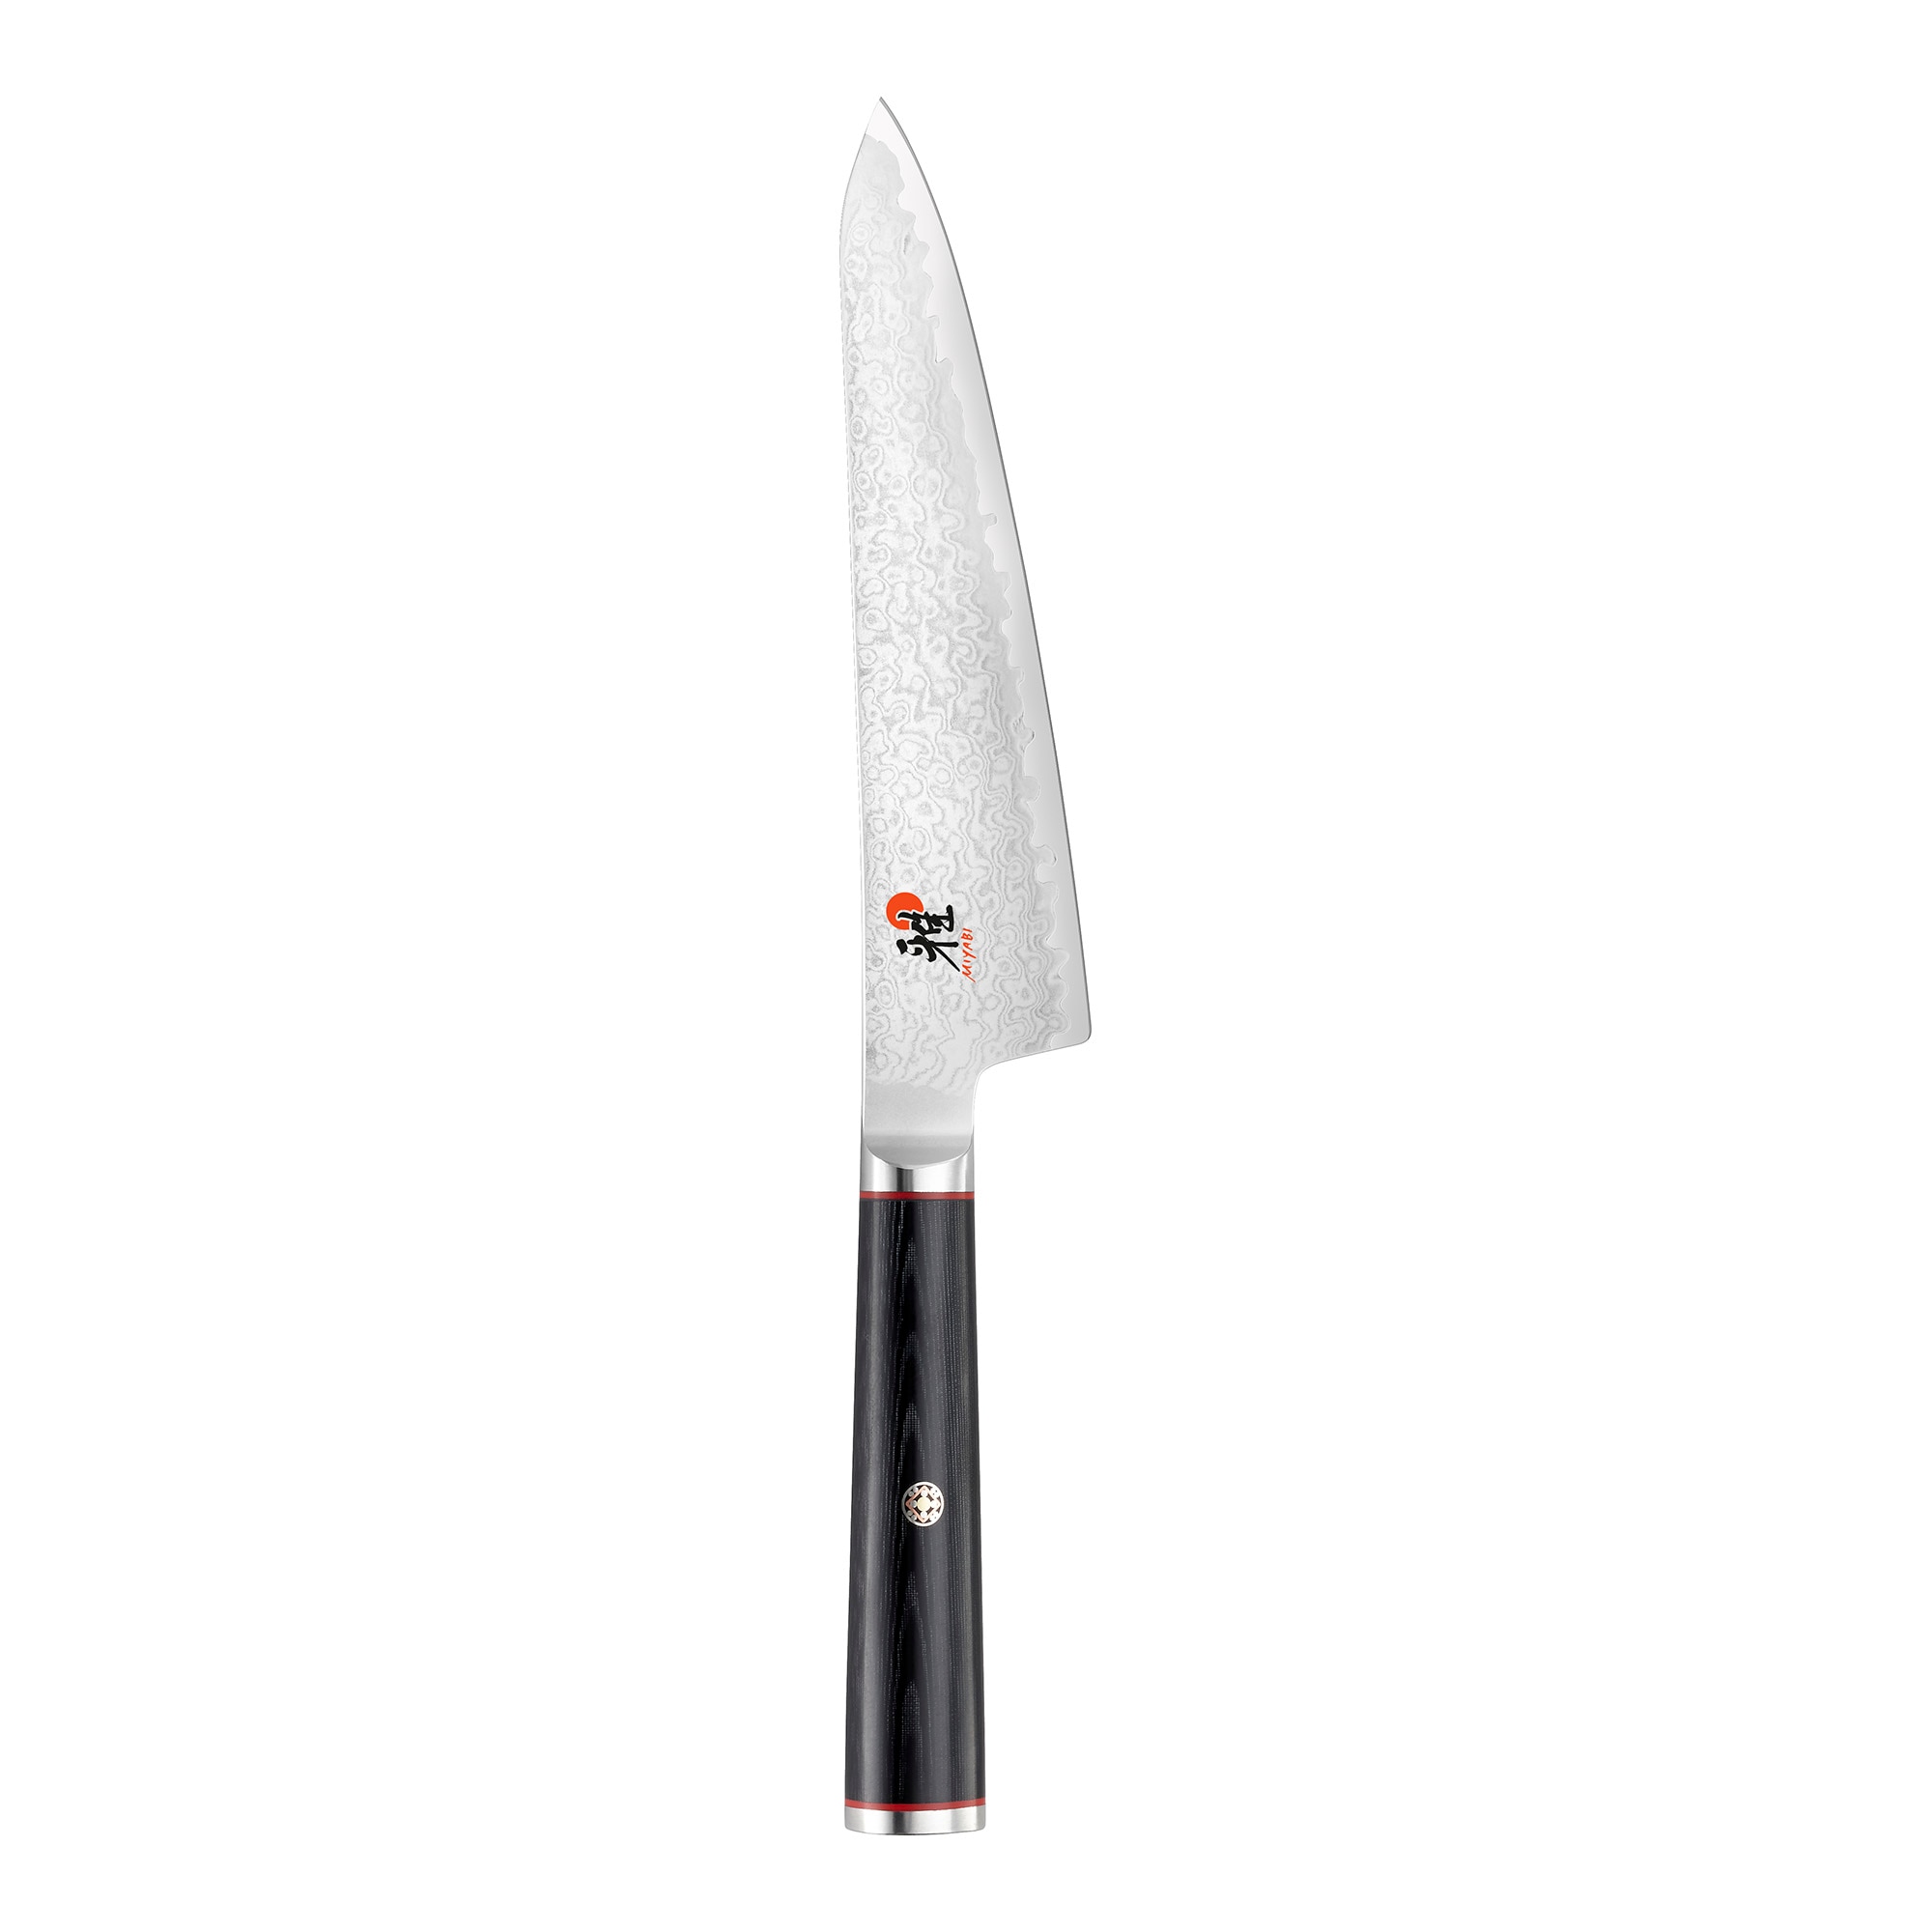 Zwilling Paring Knife